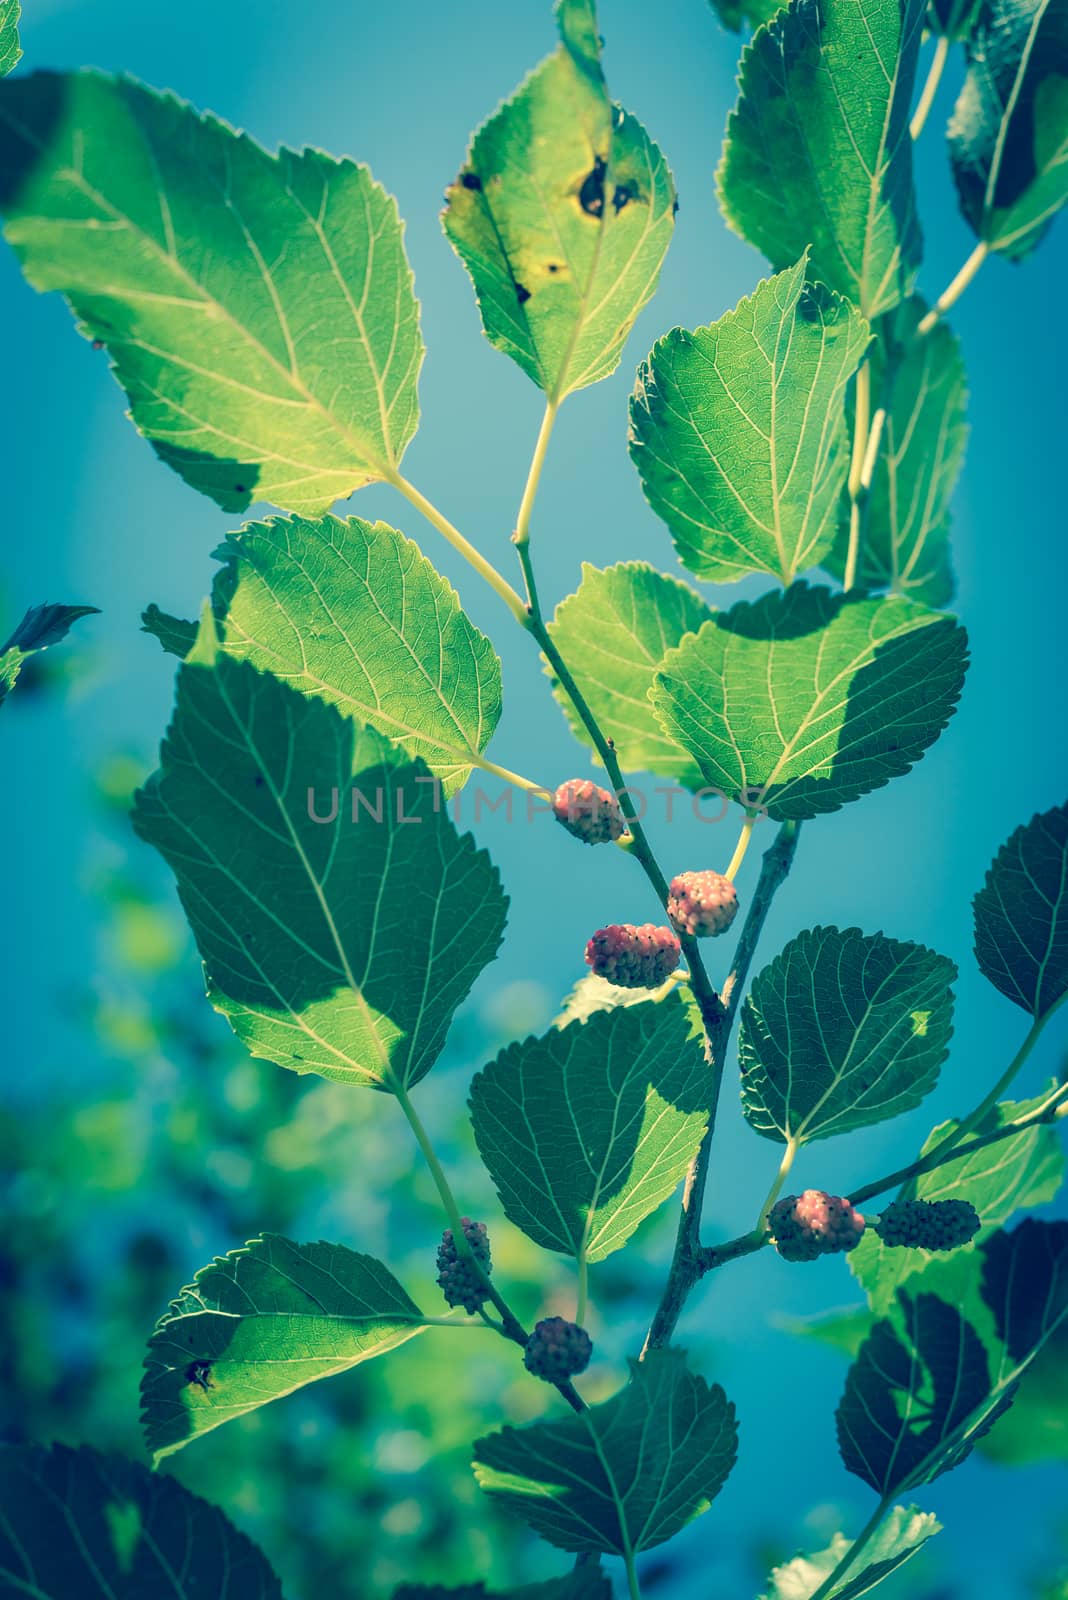 Vintage tone close-up view of sweet black mulberry morus nigra growing on tree branches near Dallas, Texas, America. Mulberries fruits ready to pickup in May harvest season